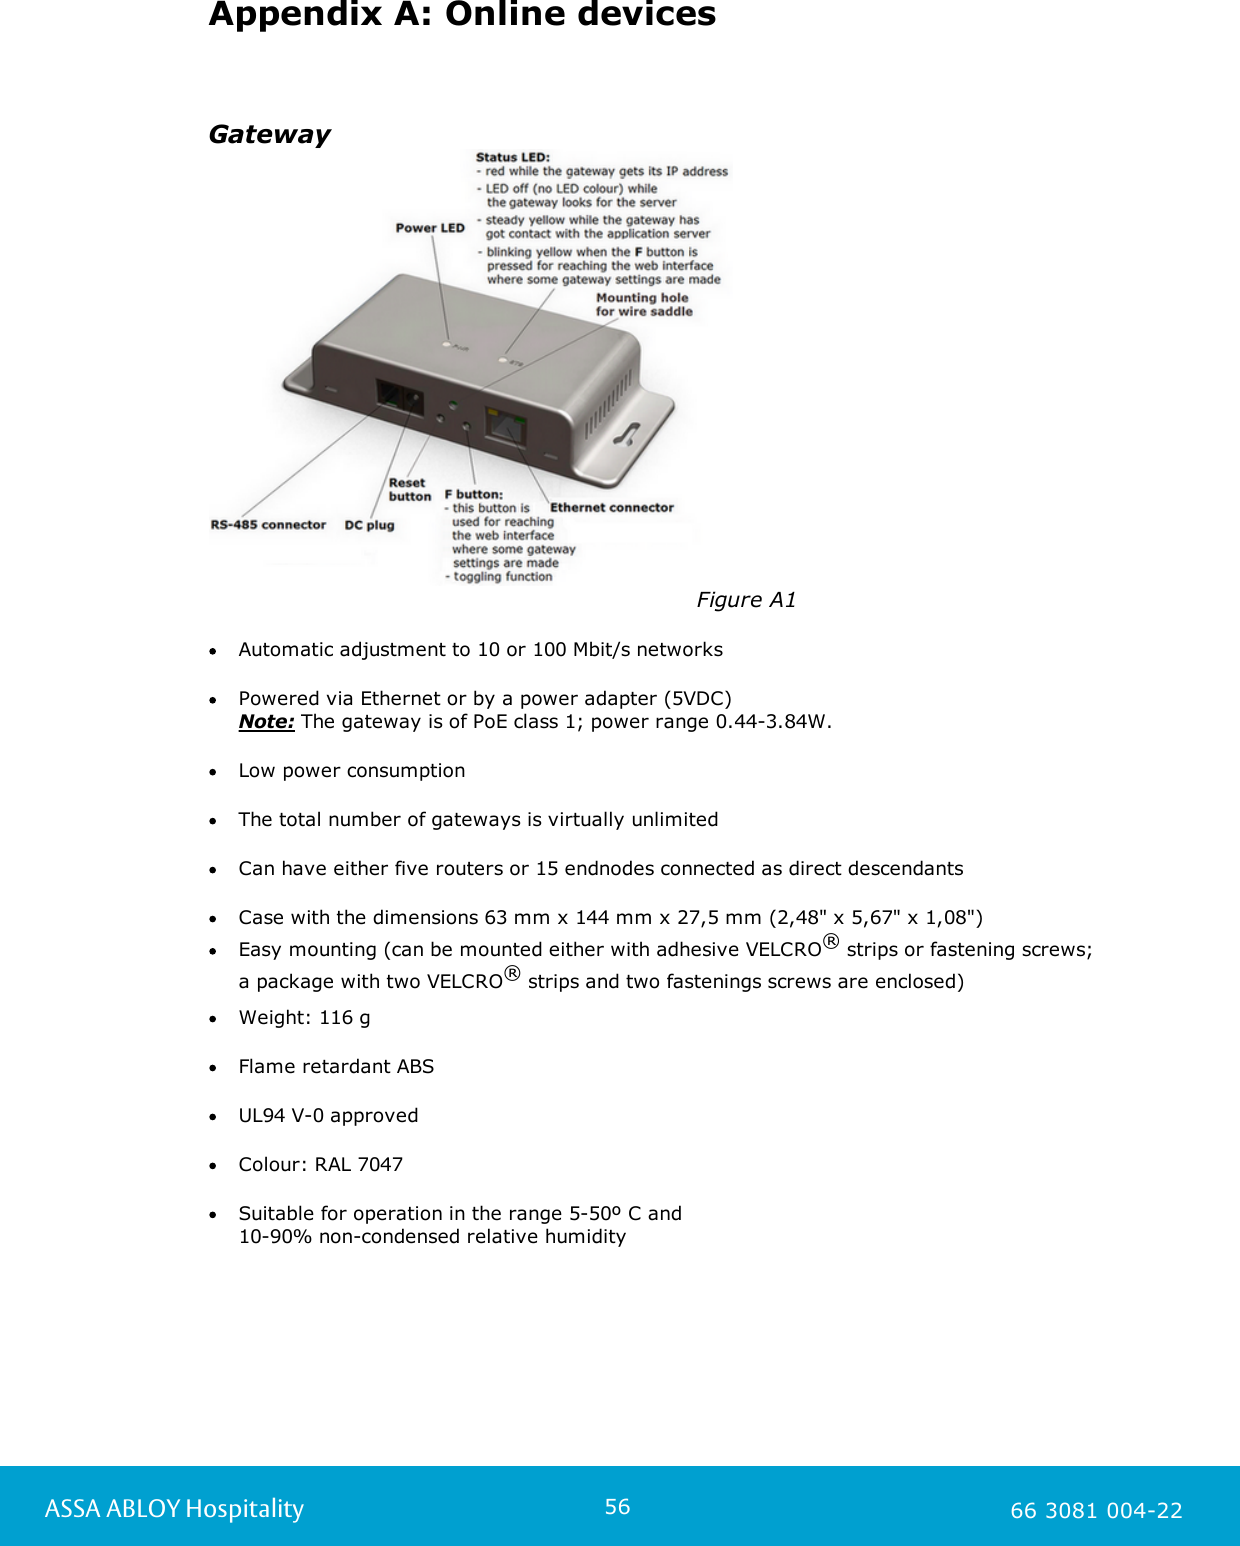 56ASSA ABLOY Hospitality 66 3081 004-22Appendix A: Online devicesGateway                                                                   Figure A1Automatic adjustment to 10 or 100 Mbit/s networksPowered via Ethernet or by a power adapter (5VDC) Note: The gateway is of PoE class 1; power range 0.44-3.84W. Low power consumptionThe total number of gateways is virtually unlimited Can have either five routers or 15 endnodes connected as direct descendantsCase with the dimensions 63 mm x 144 mm x 27,5 mm (2,48&quot; x 5,67&quot; x 1,08&quot;)Easy mounting (can be mounted either with adhesive VELCRO® strips or fastening screws; a package with two VELCRO® strips and two fastenings screws are enclosed)    Weight: 116 gFlame retardant ABSUL94 V-0 approvedColour: RAL 7047Suitable for operation in the range 5-50º C and 10-90% non-condensed relative humidity